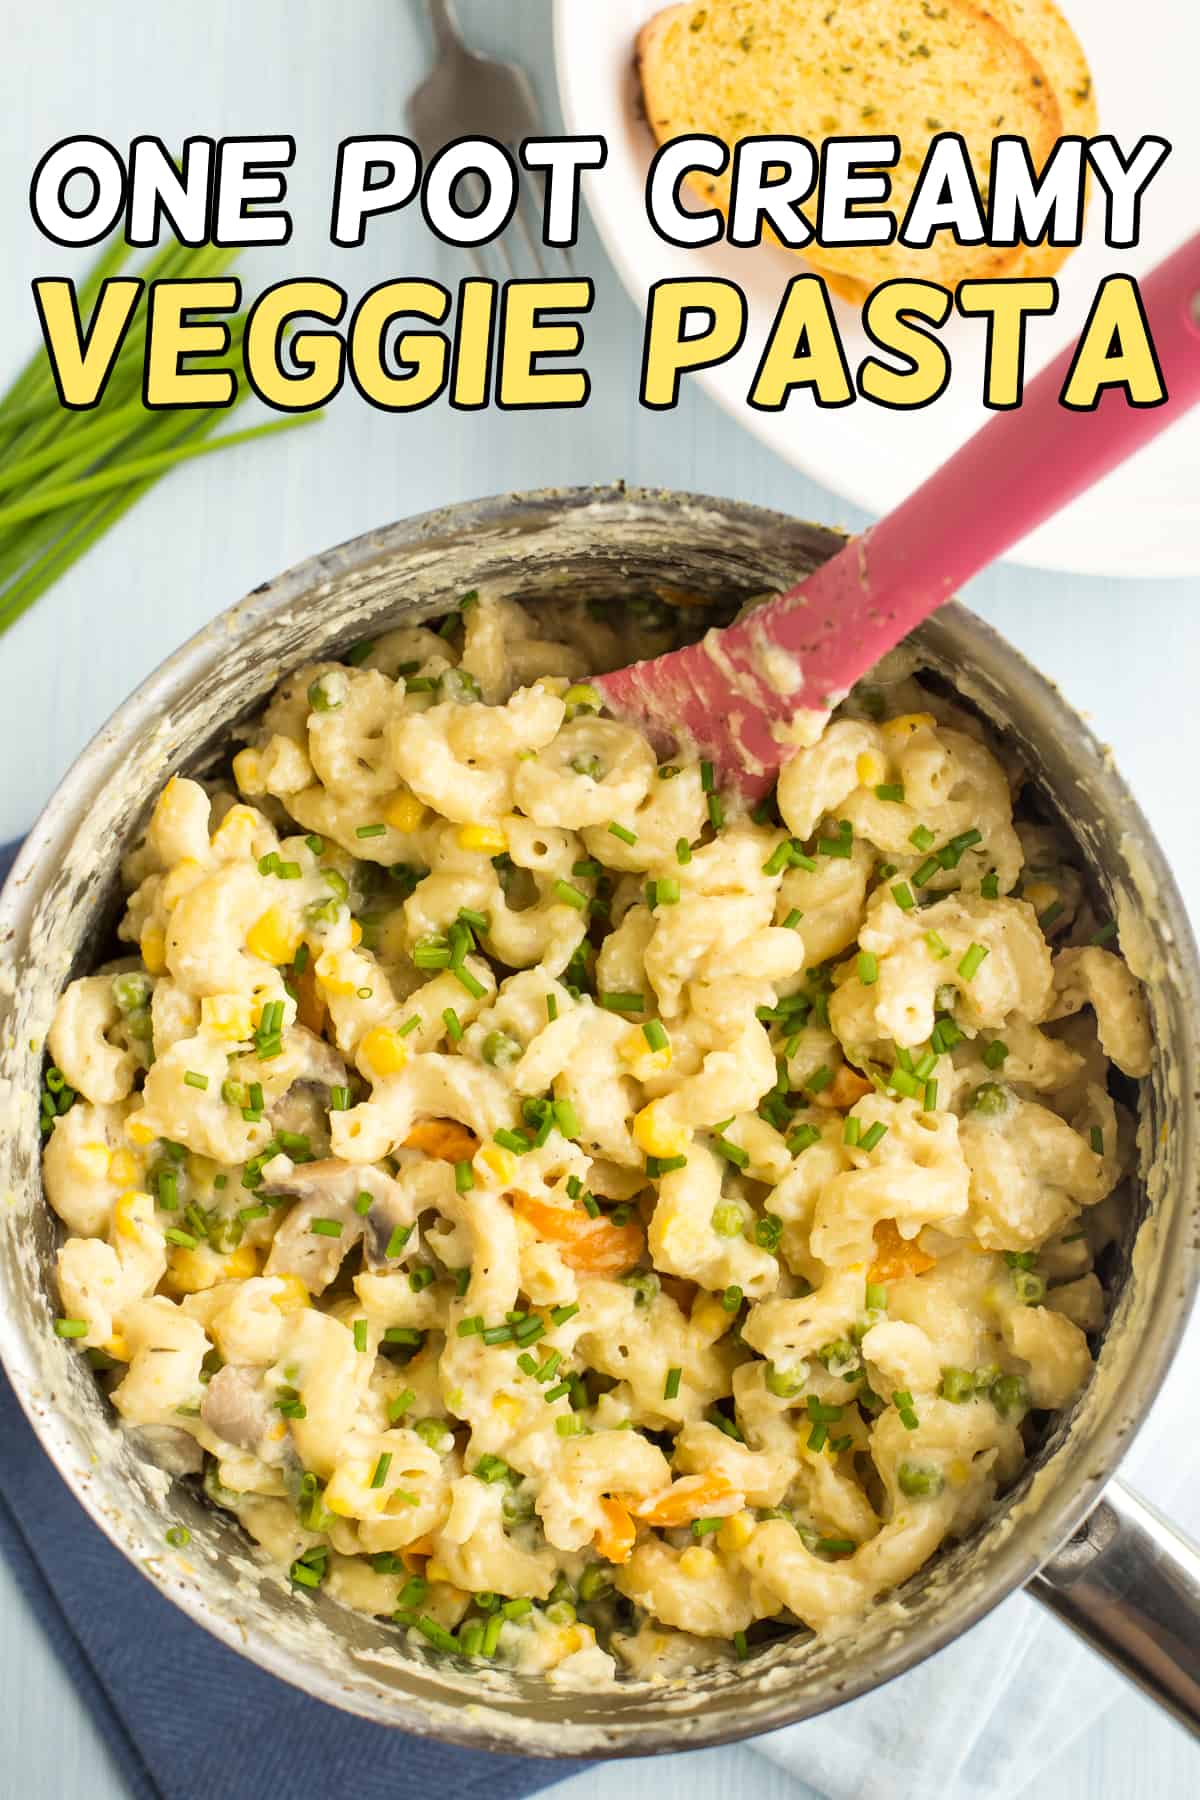 One pot creamy veggie pasta in a saucepan topped with chives.